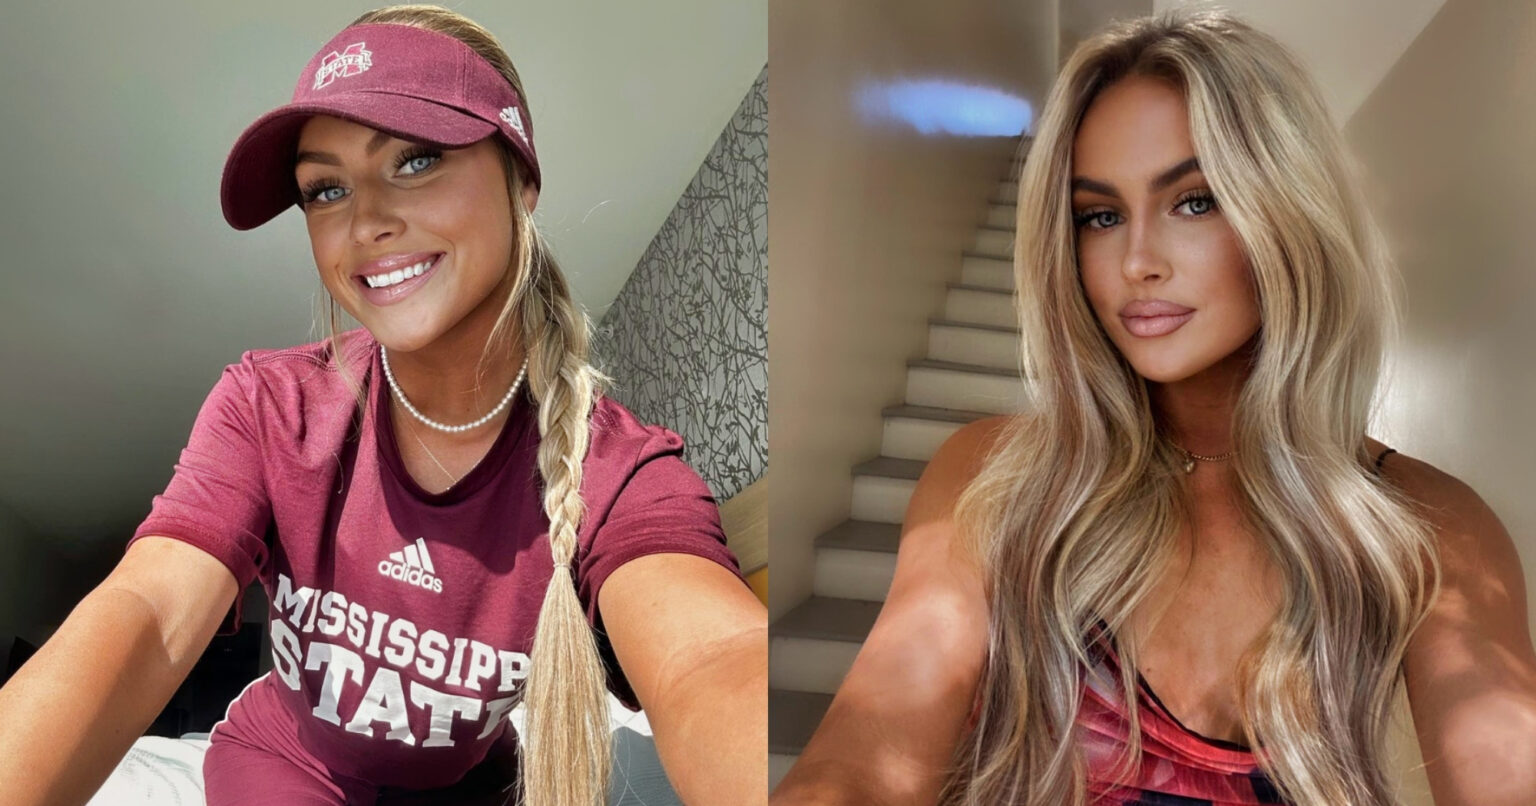 Mississippi State College Softball Player Brylie St. Clair is Making